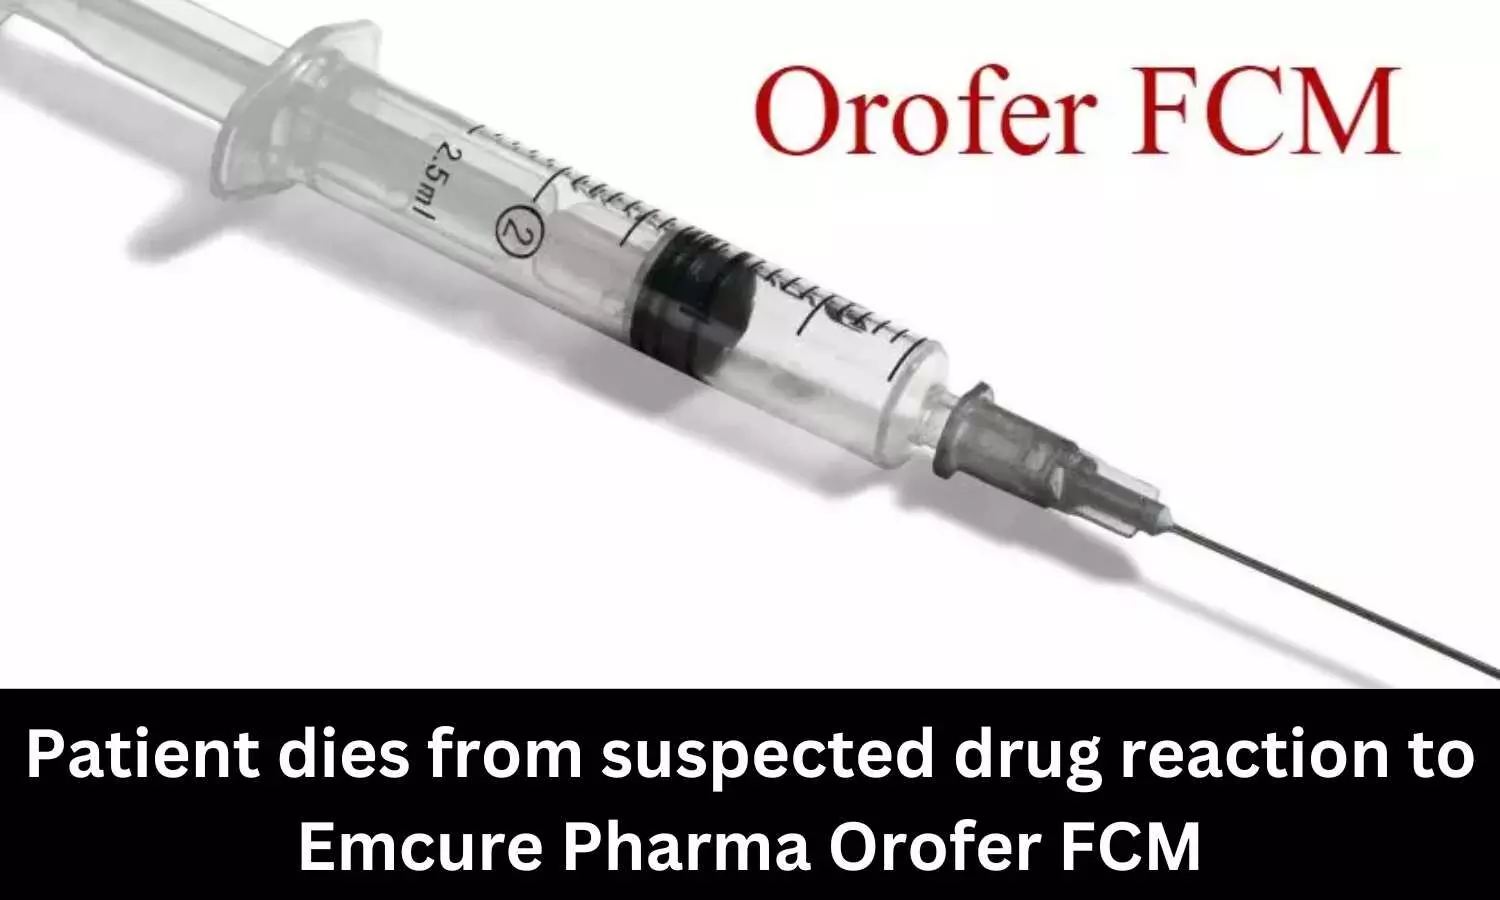 Patient dies from suspected drug reaction to Emcure Pharma Orofer FCM, Maha FDA issues nationwide recall